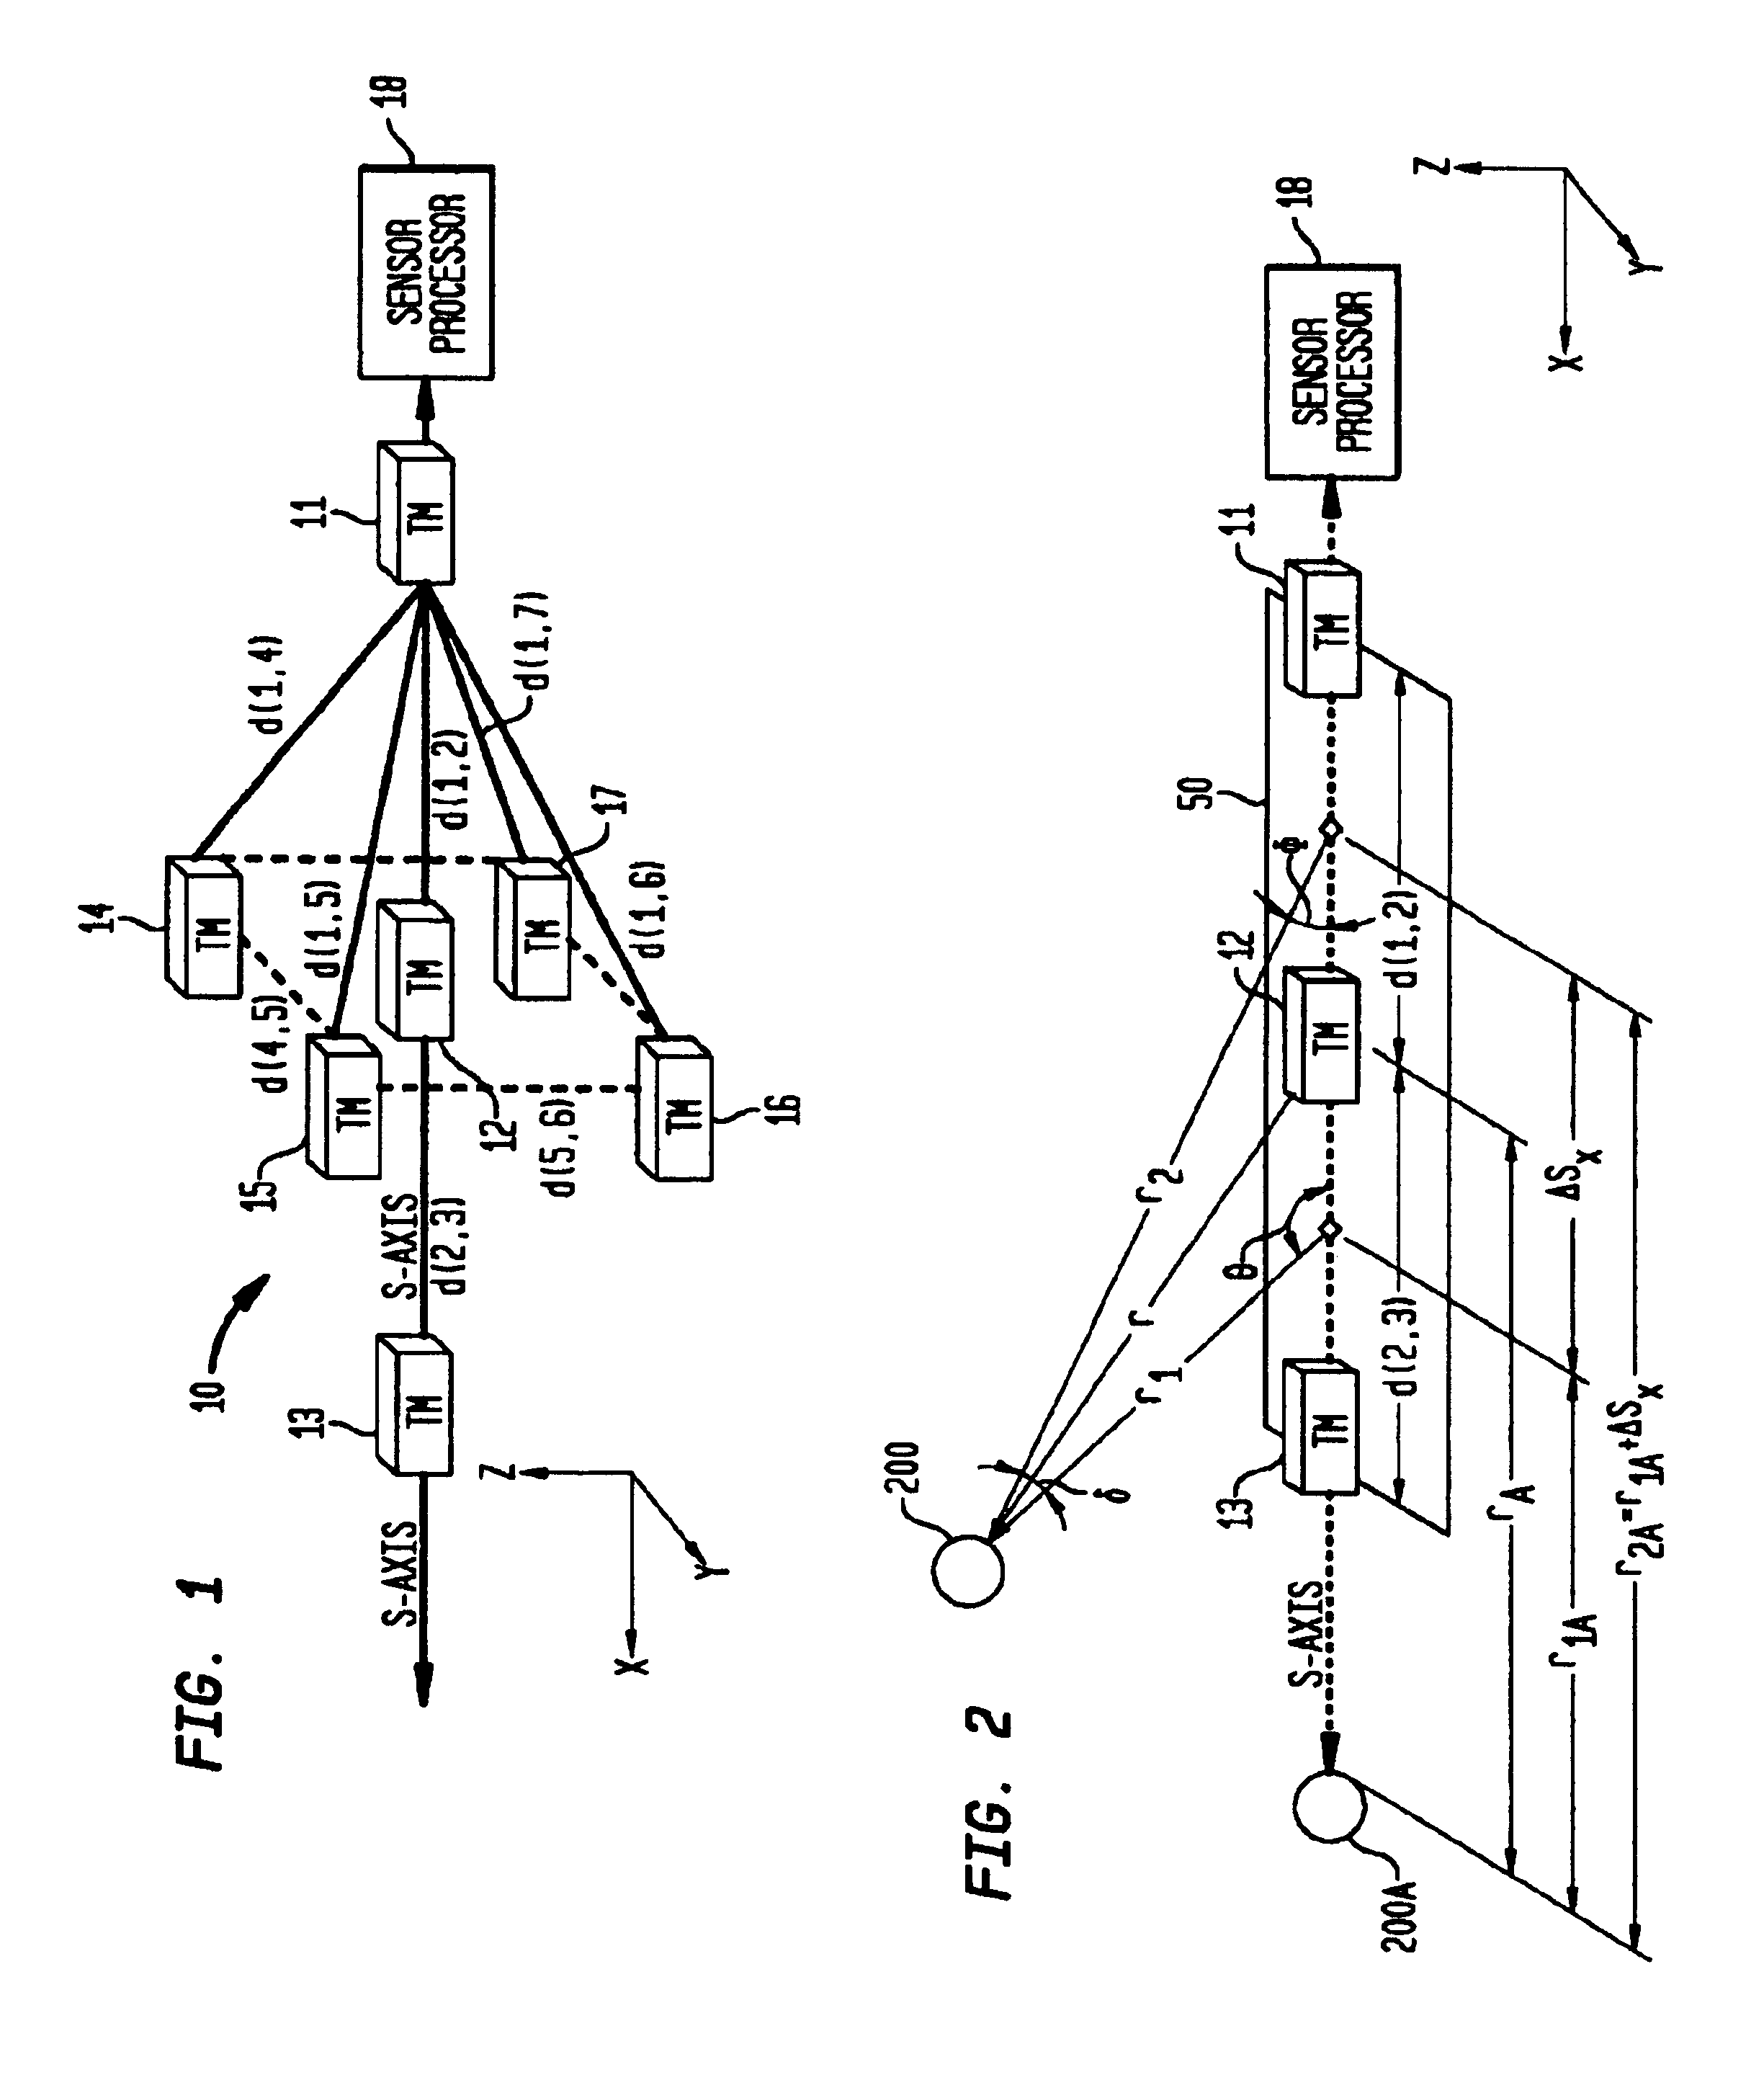 Magnetic anomaly sensing system for detection, localization and classification of magnetic objects